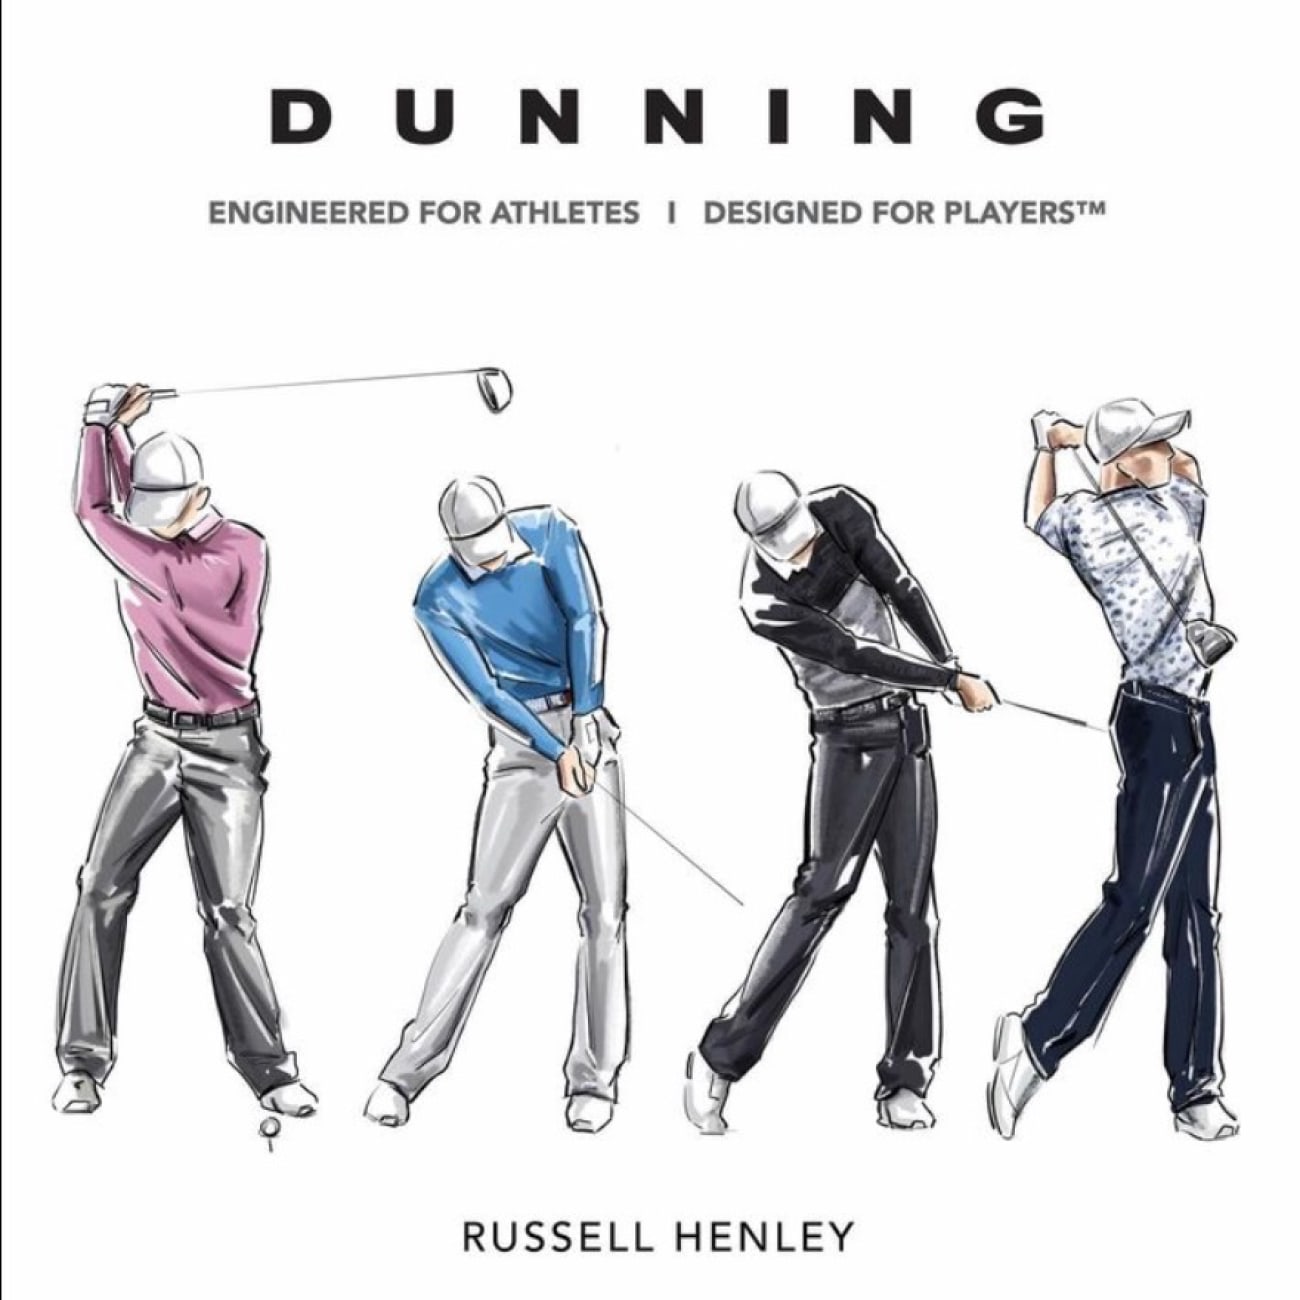 Russell Henley Masters scripting from Dunning